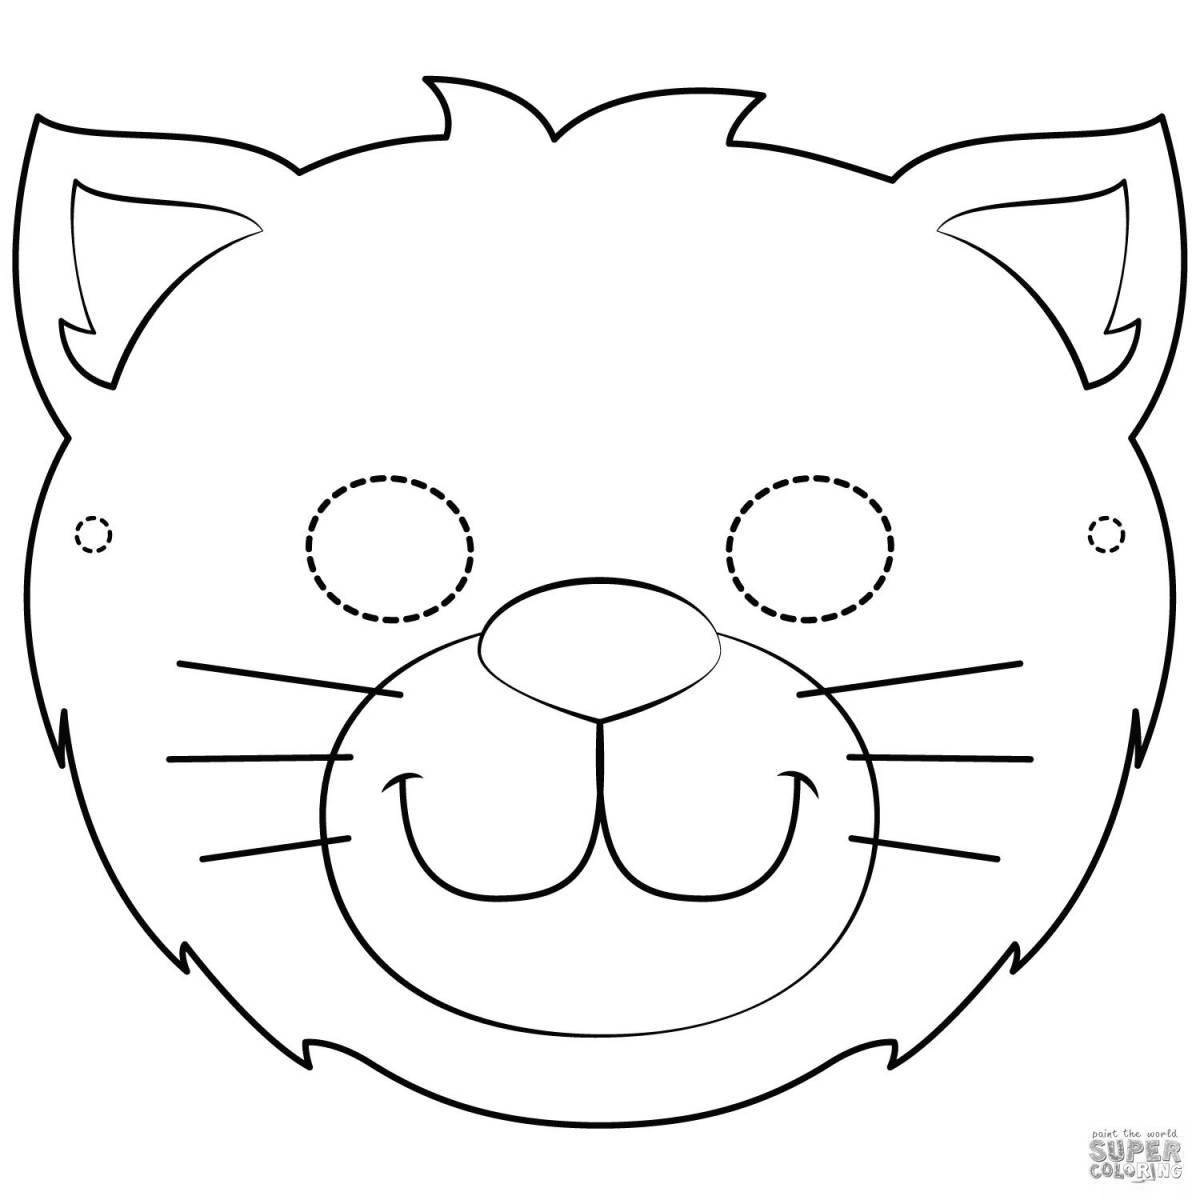 Colourful cat mask coloring page